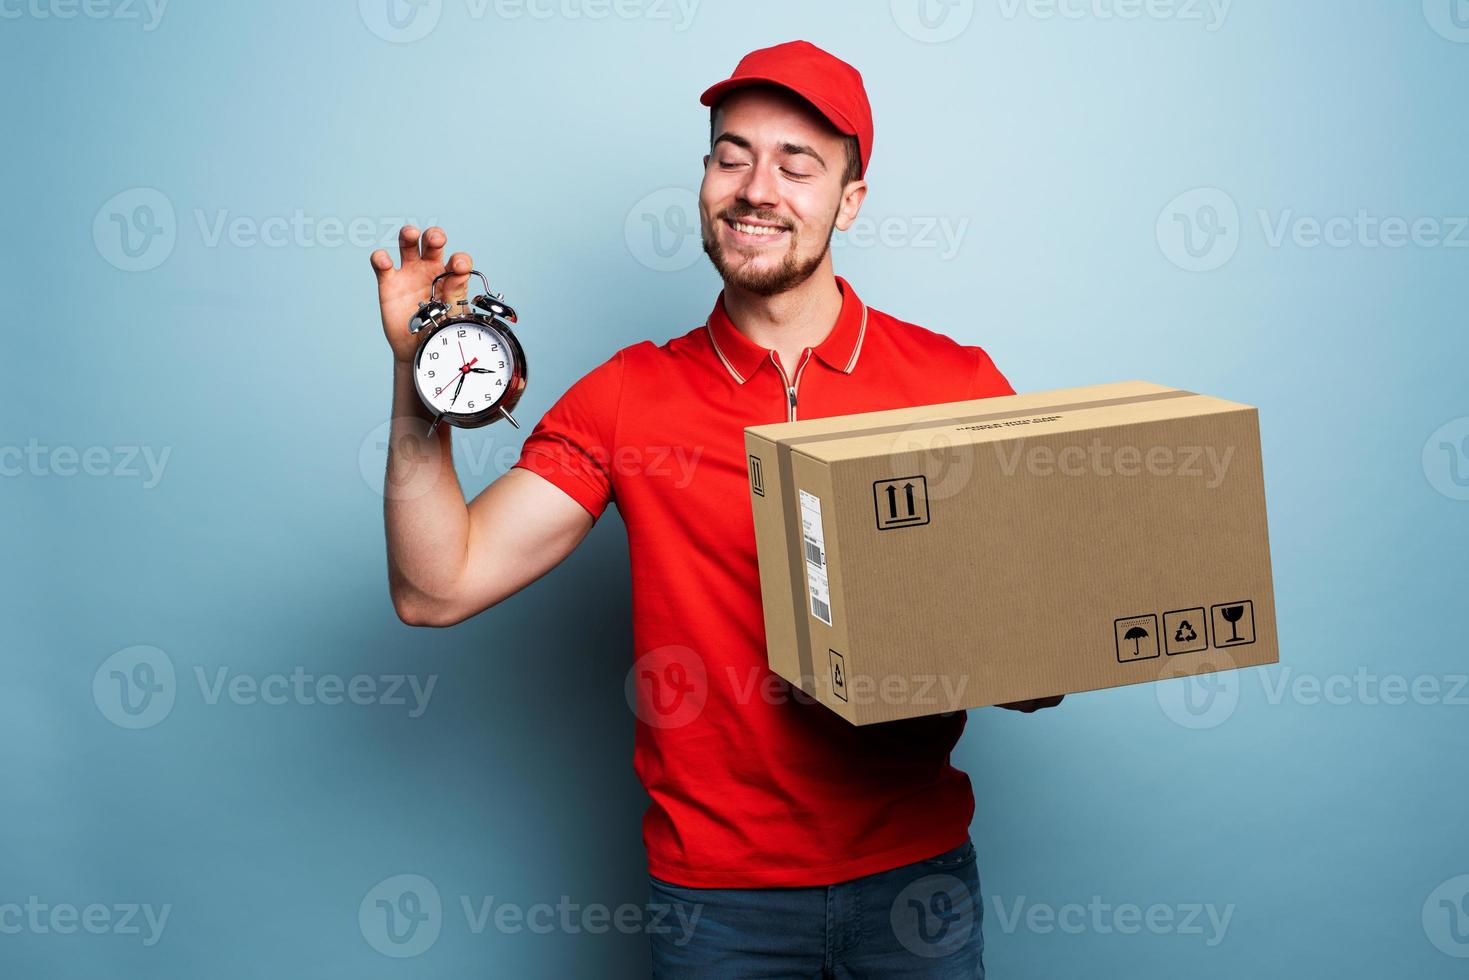 Courier is punctual to deliver the package. Emotional expression. Cyan background photo